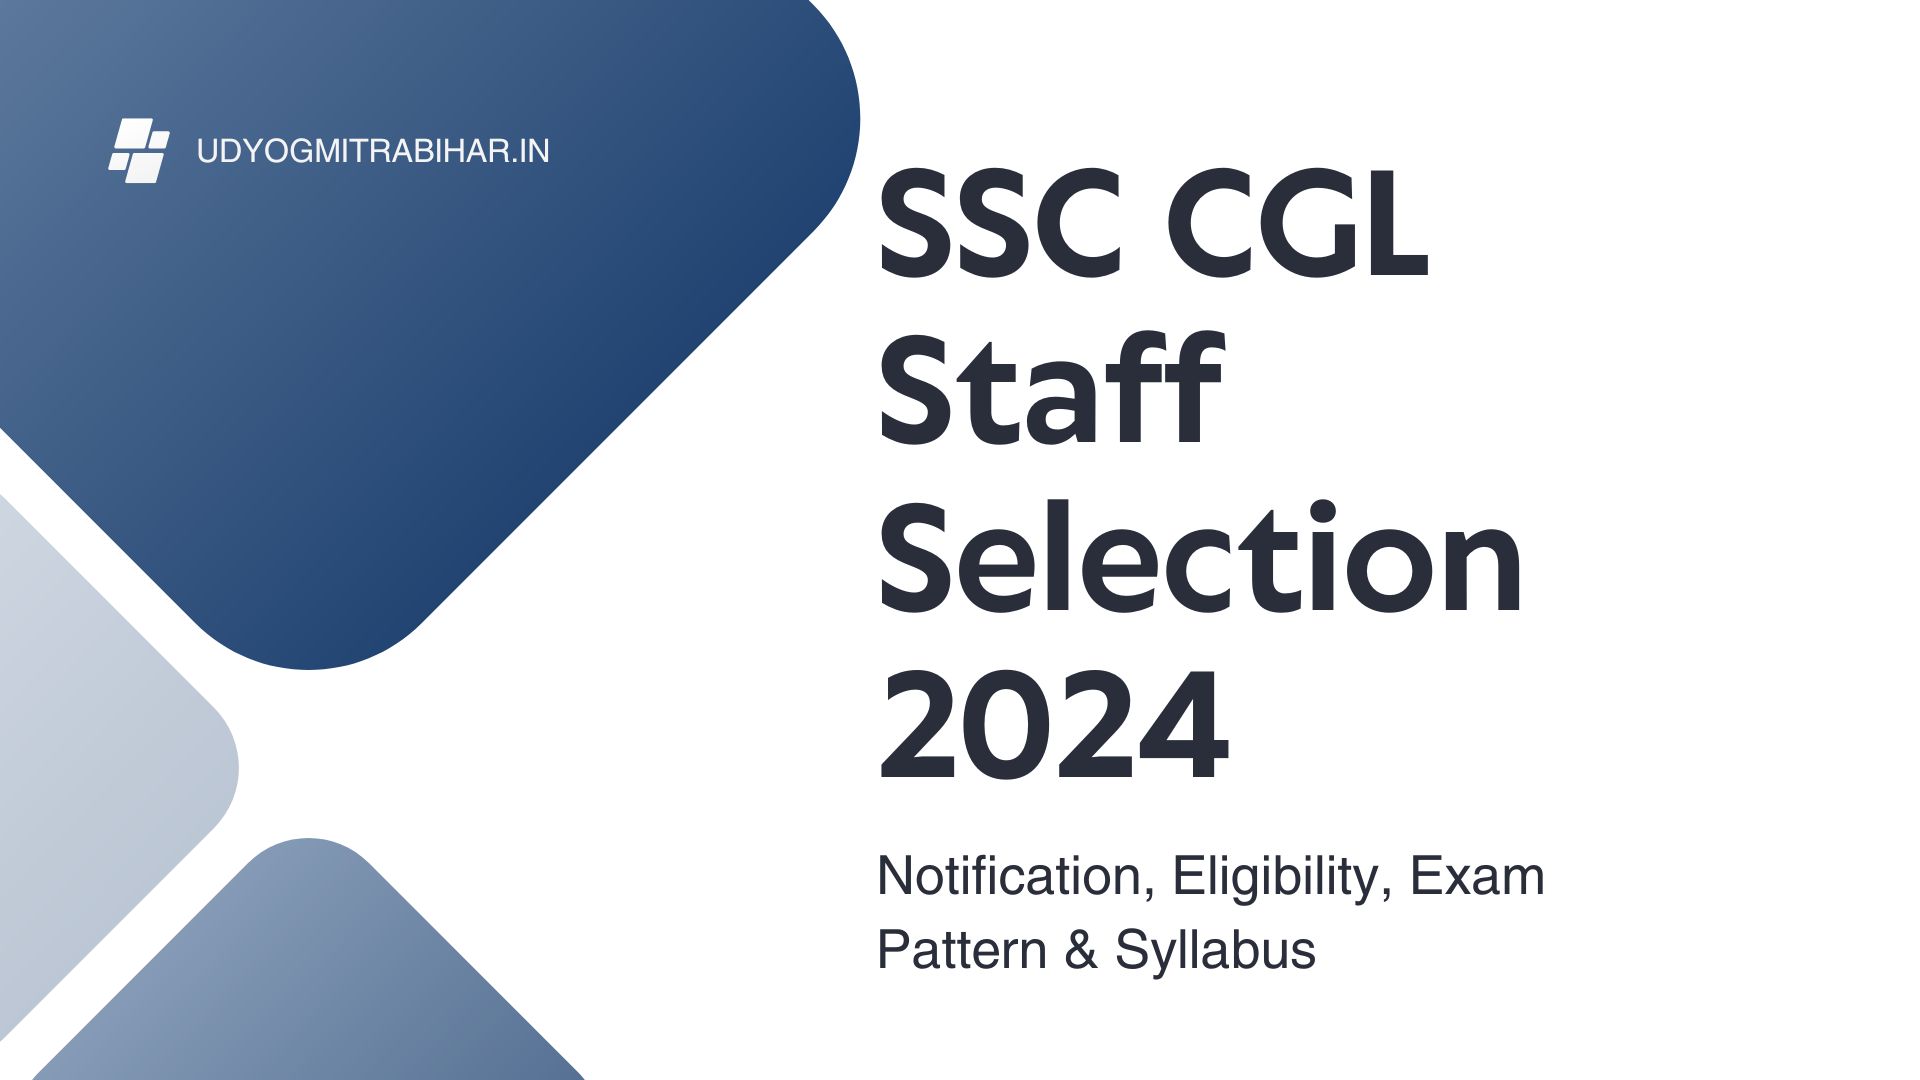 SSC CGL 2024 Notification, Eligibility, Exam Pattern, Syllabus, Application Process, and More